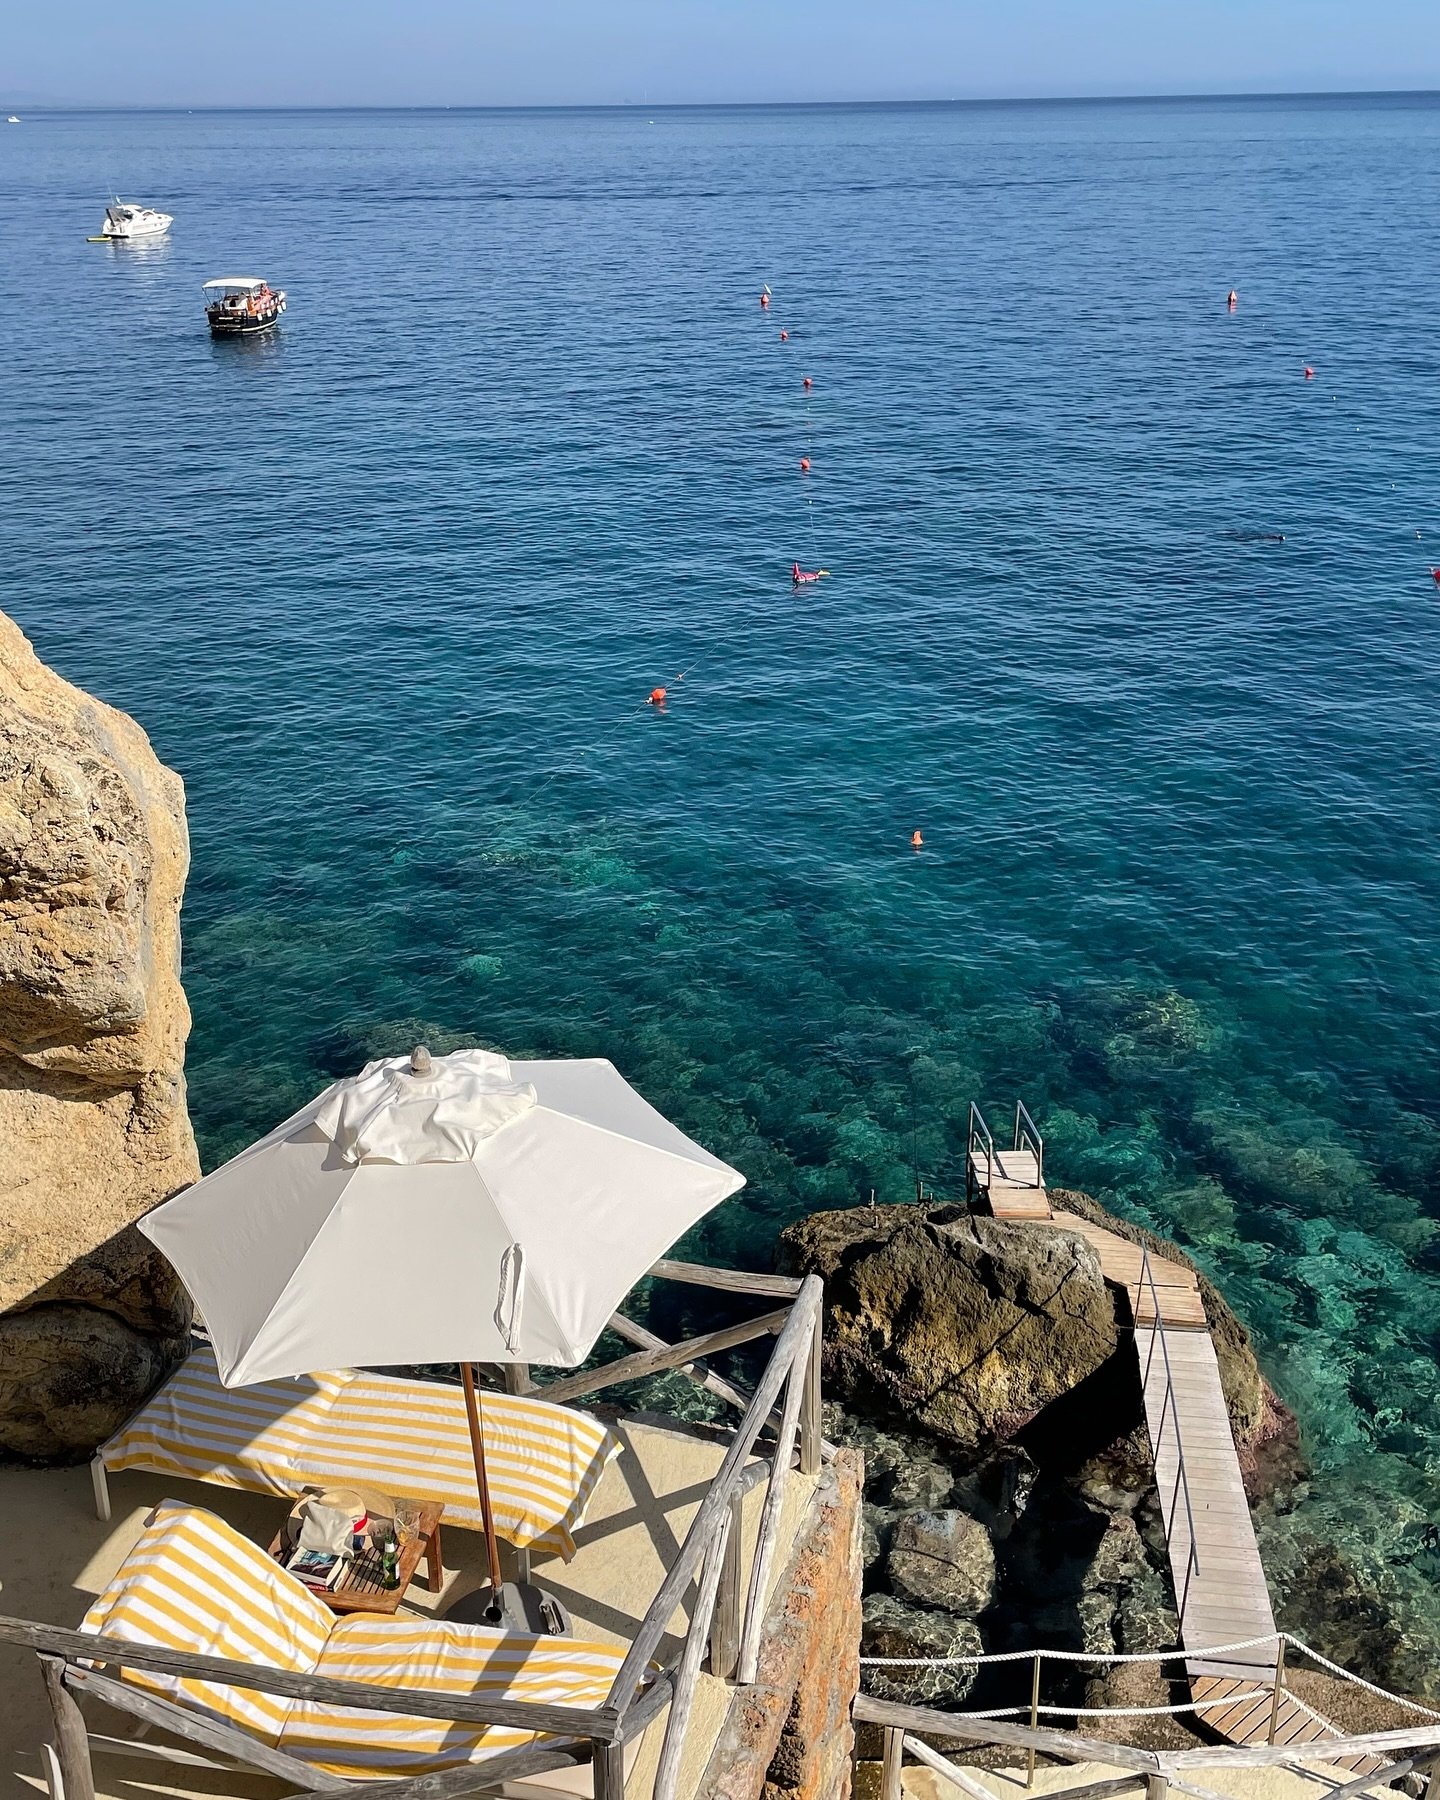 Languid afternoons, siestas under the hot Italian sun, scents of orange blossom filling the air, sea dips at La Fontelina, seafood pasta at LouLou&rsquo;s, club55 disco and du Cap high dives, aperitivo hour in Amalfi and Capri sunsets &mdash; a quint